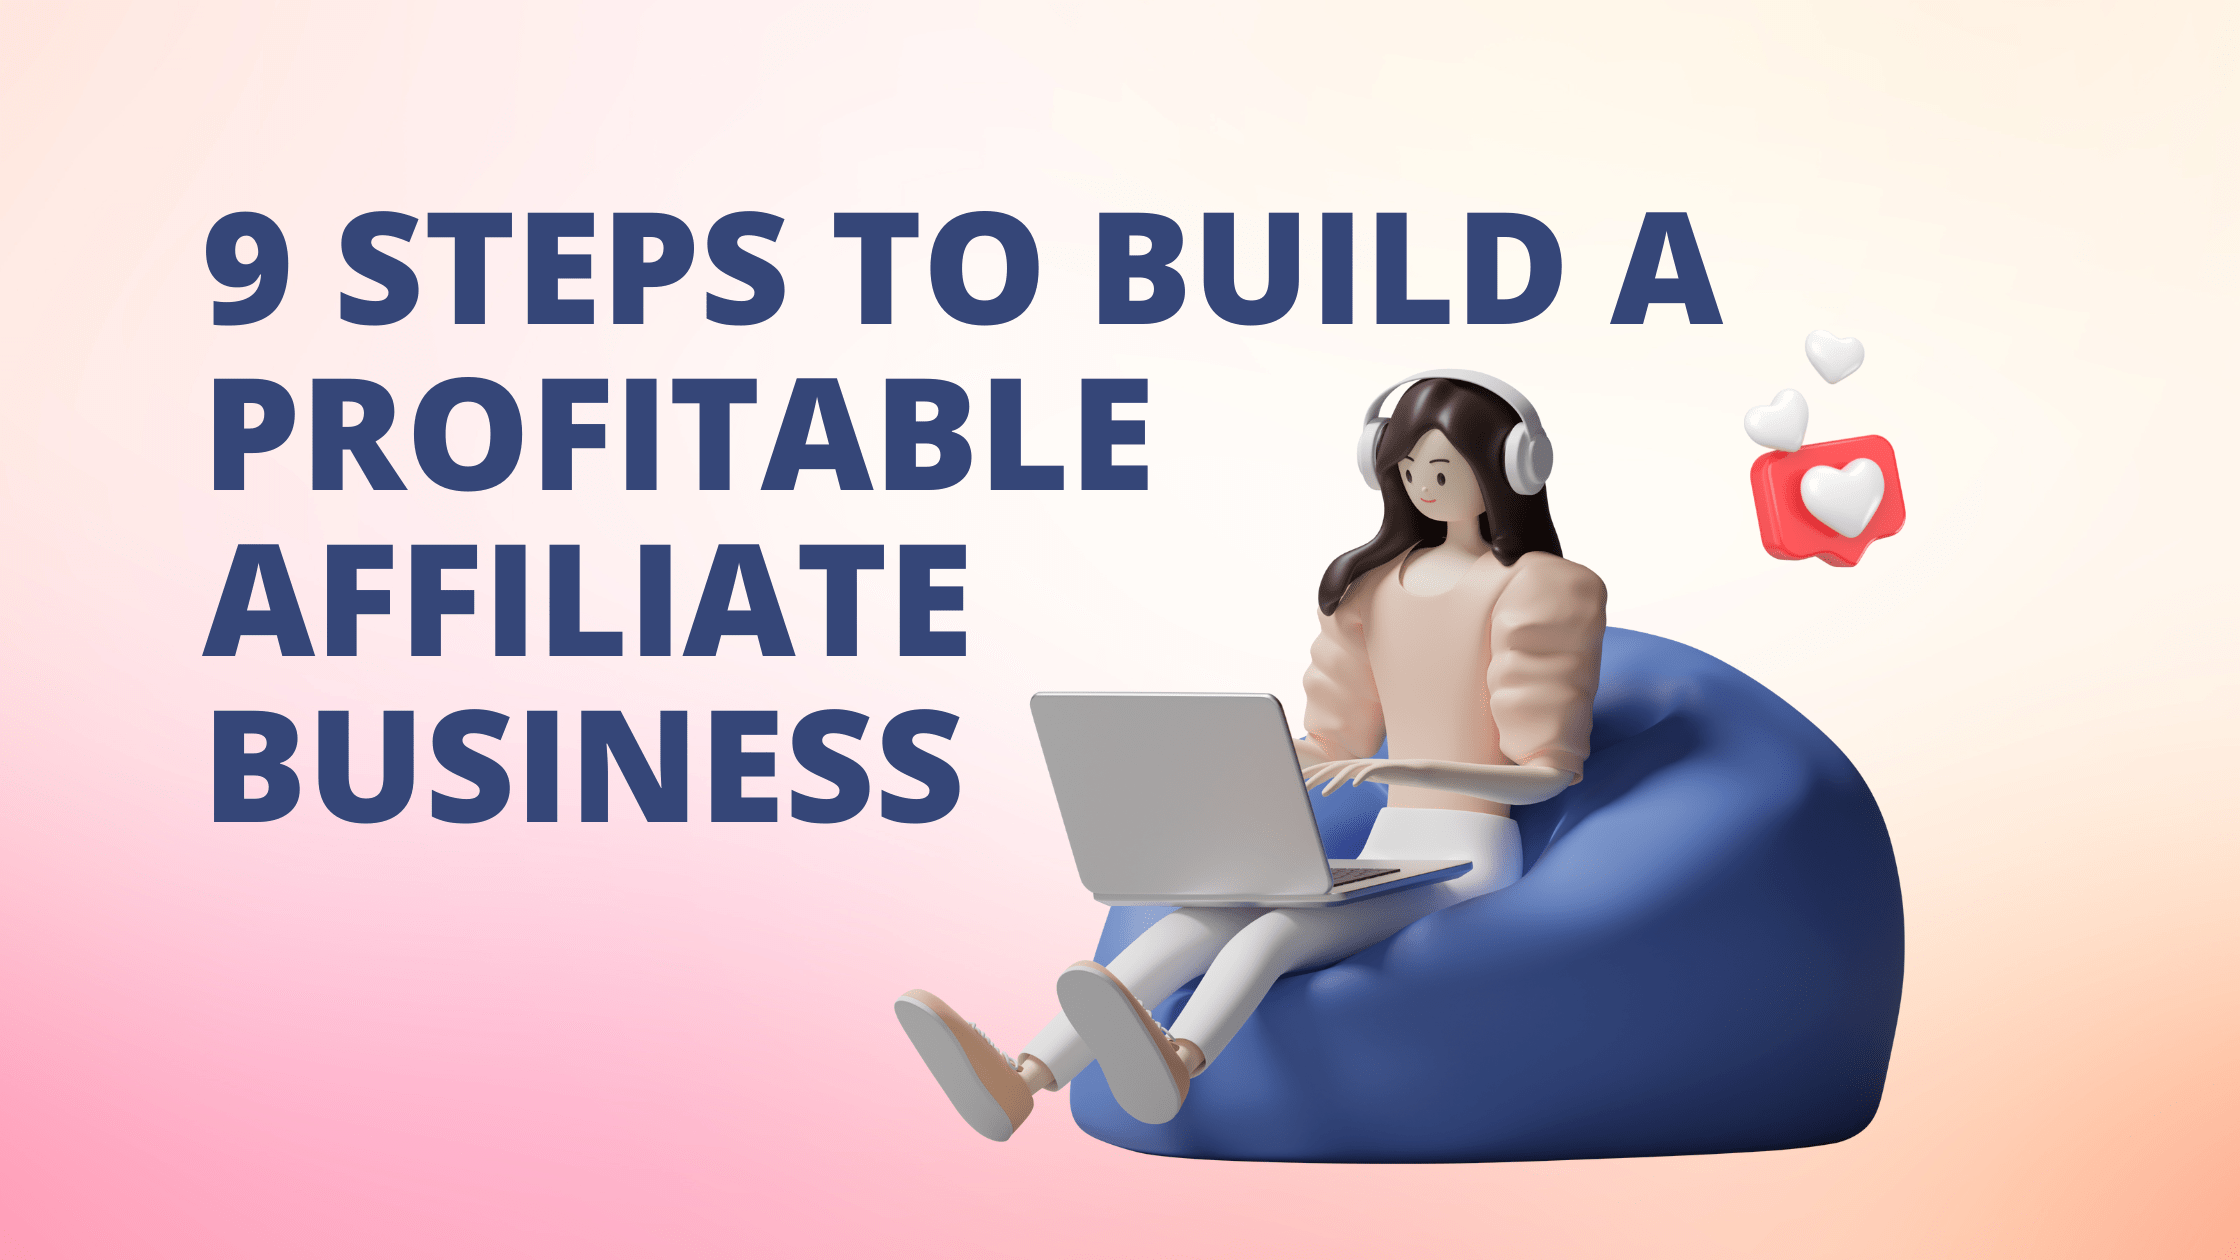 Lady sitting on beanbag working on building a profitable affiliate business